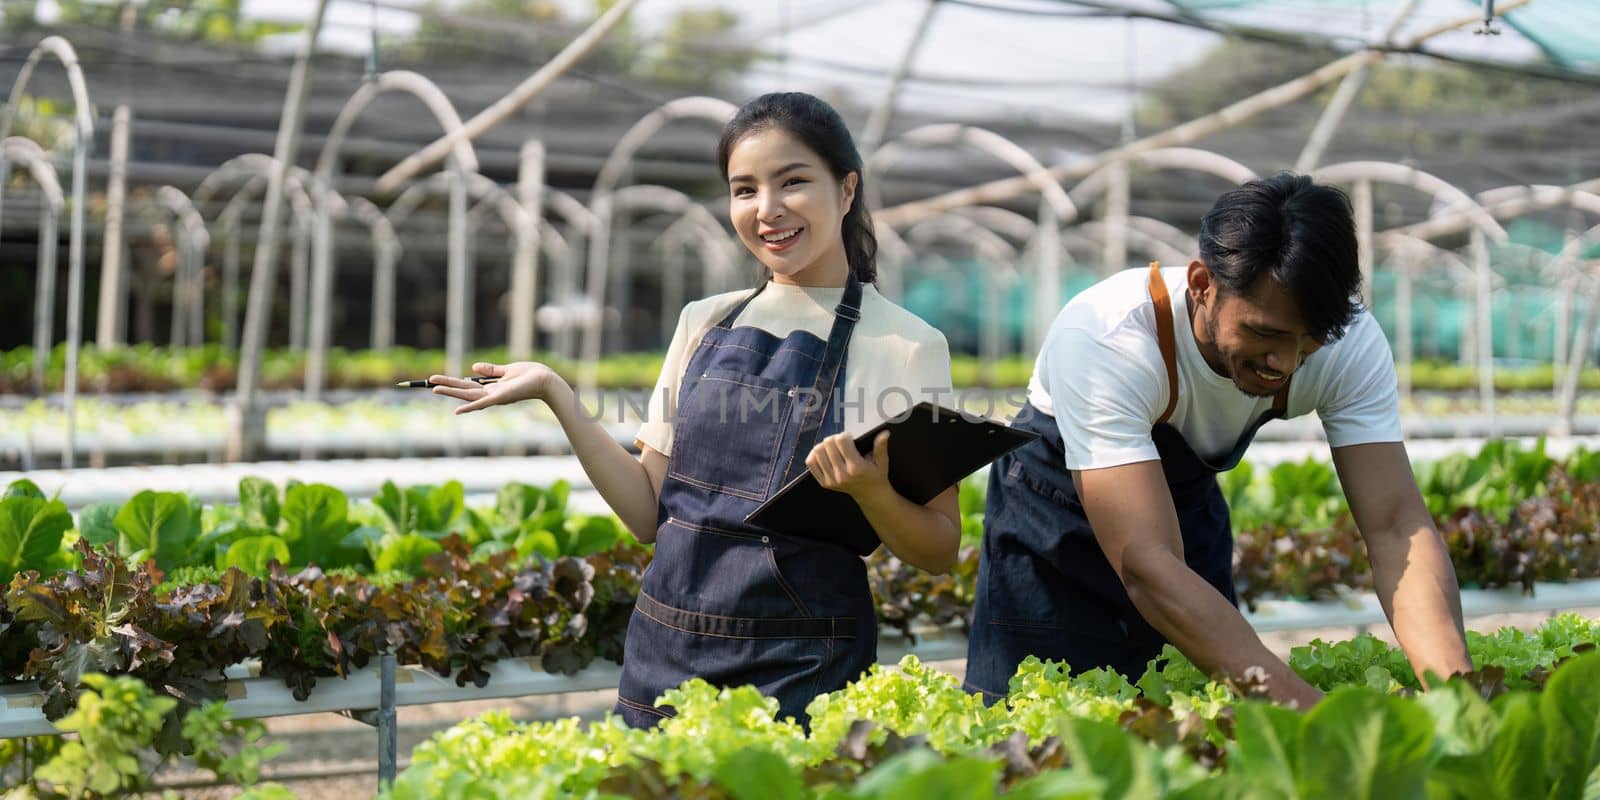 Asian woman and man farmer working together in organic hydroponic salad vegetable farm. inspect quality of lettuce in greenhouse garden.